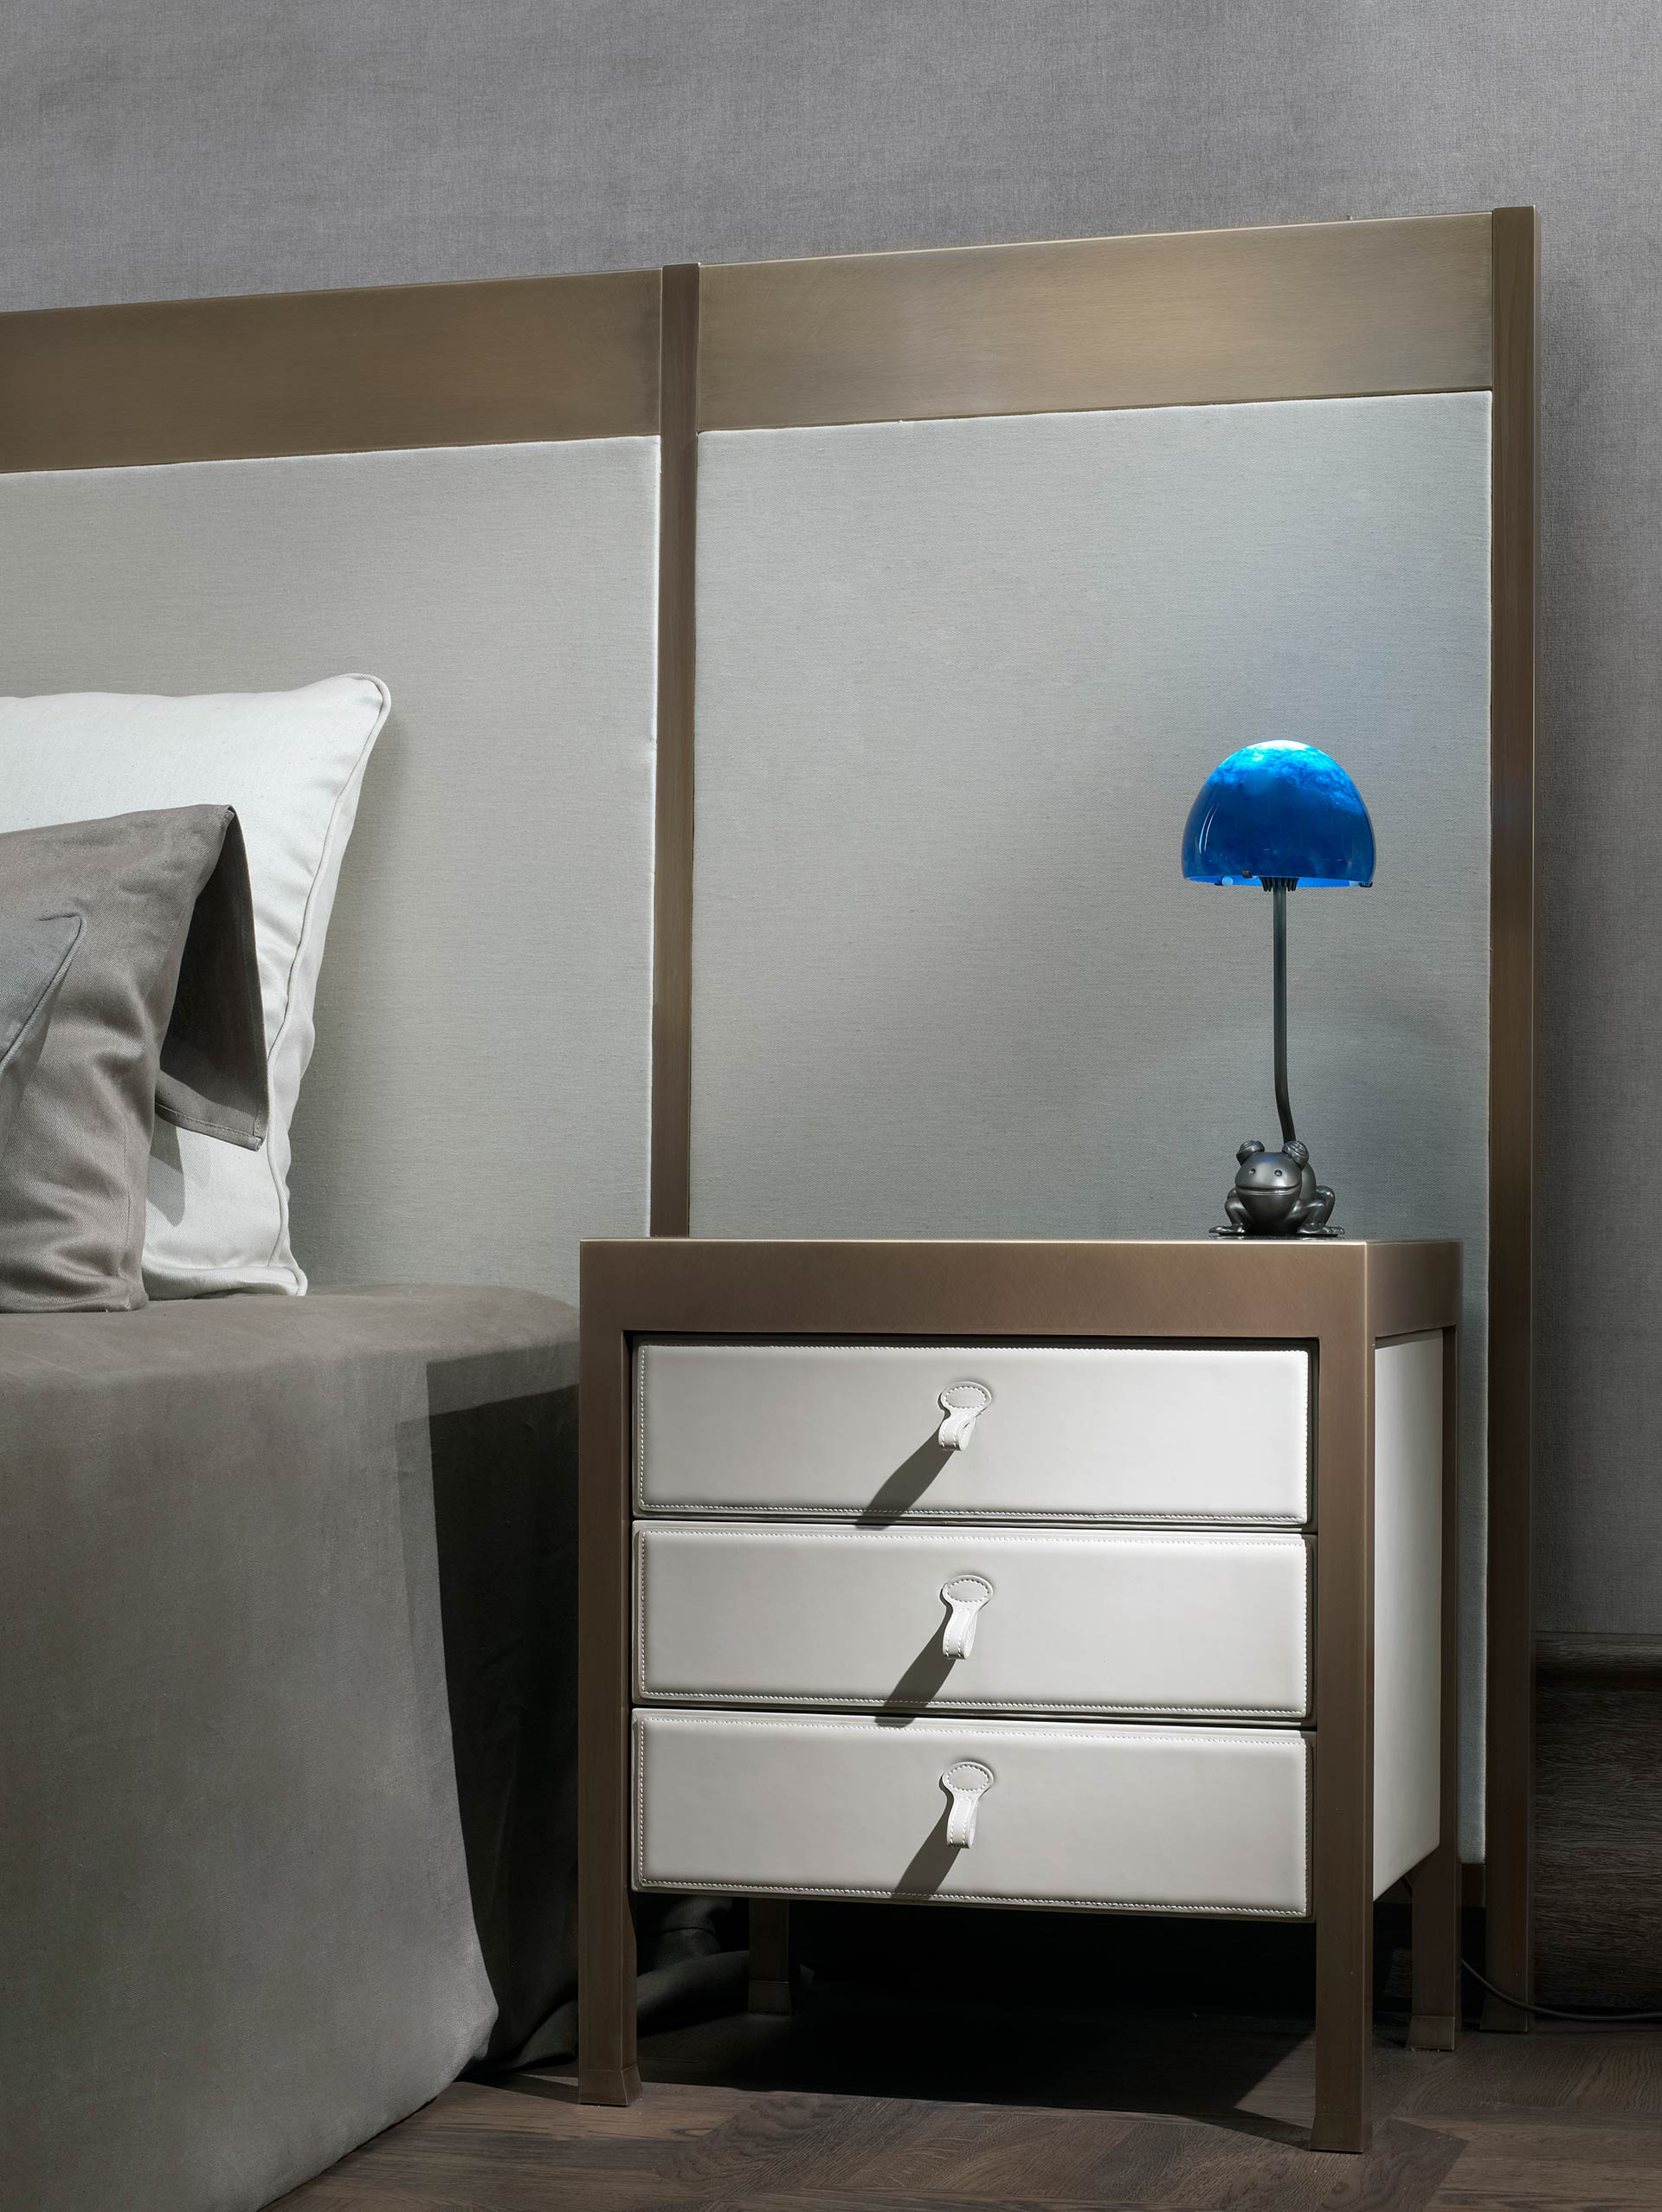 Gong is a bronze bedside table that can be covered in fabric or leather, from the Promemoria's catalogue | Promemoria